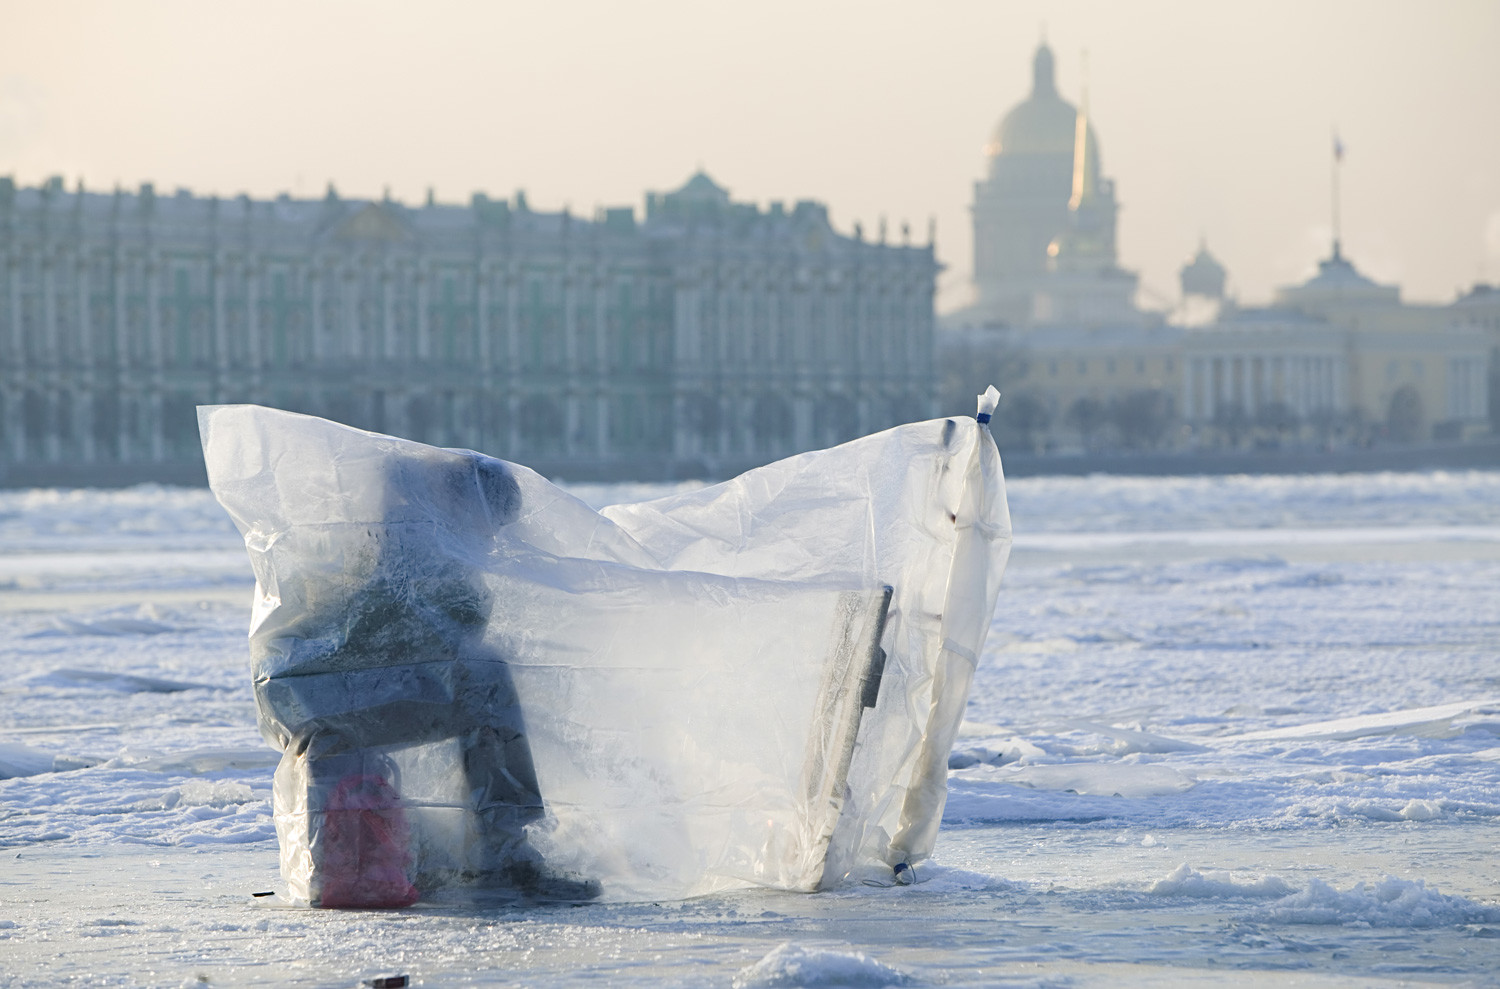 Winter fishing on the Neva. The Winter Palace. St. Petersburg. Russia